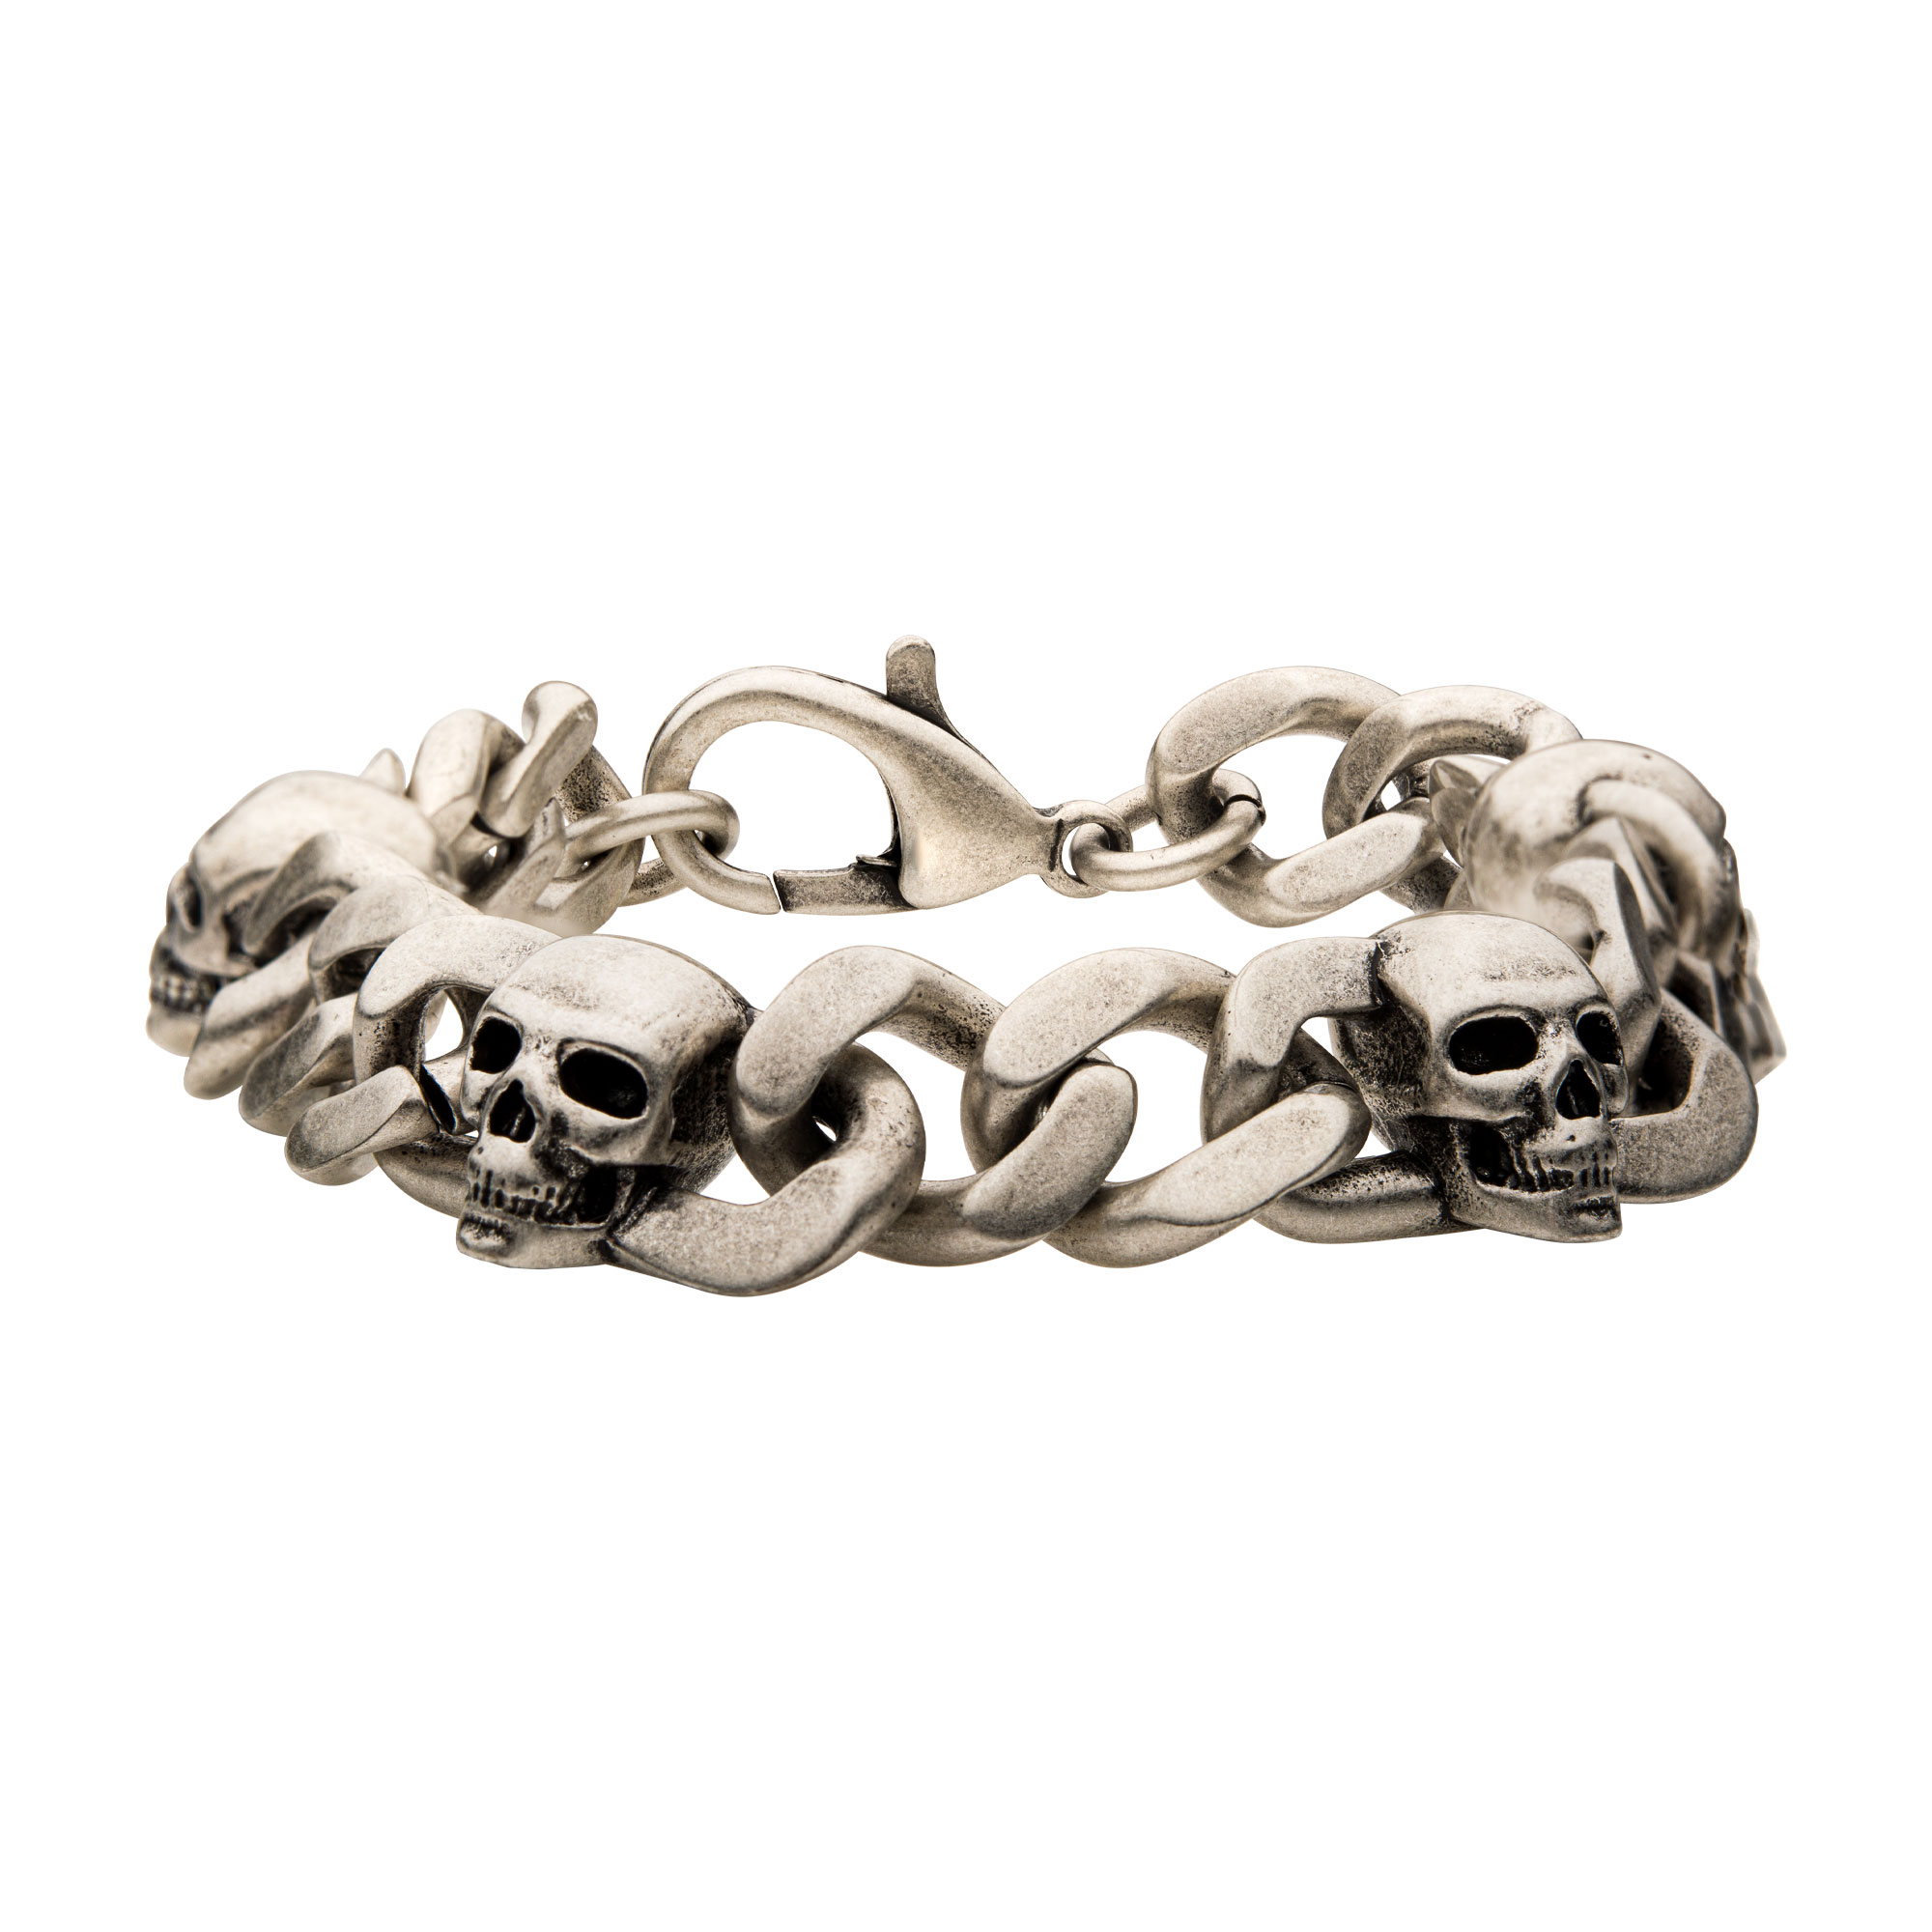 Stainless Steel Silver Plated with Skull Design Chunky Chain Bracelet Jayson Jewelers Cape Girardeau, MO